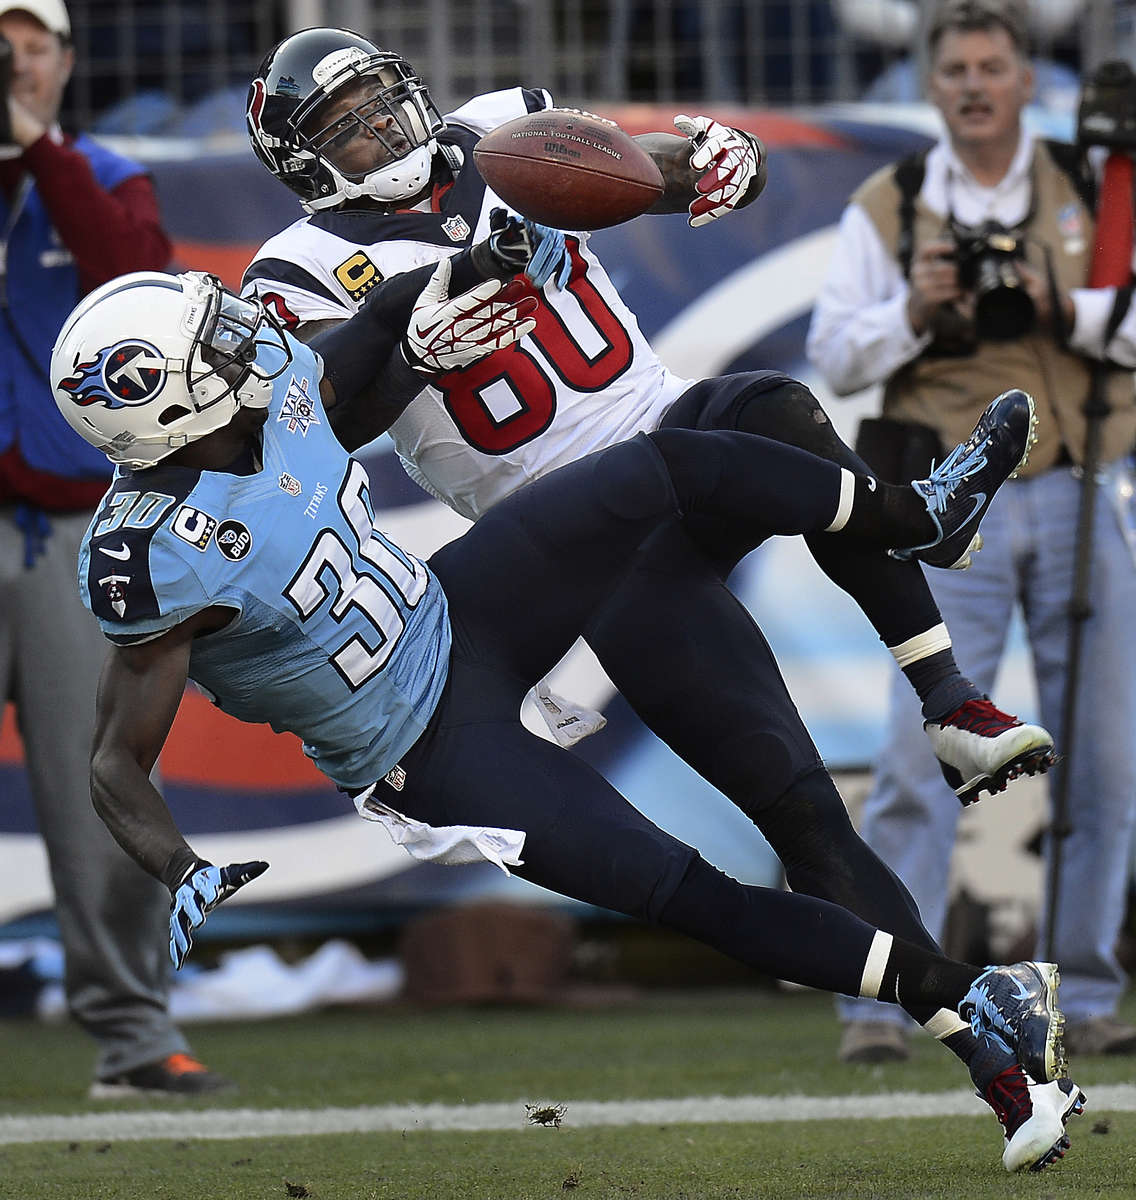 Tennessee Titans cornerback Jason McCourty breaksup a pass intended for Houston Texans wide receiver Andre Johnson in the fourth quarter of an NFL football game on Dec. 29, 2013, in Nashville, Tenn. (AP Photo/Mark Zaleski)